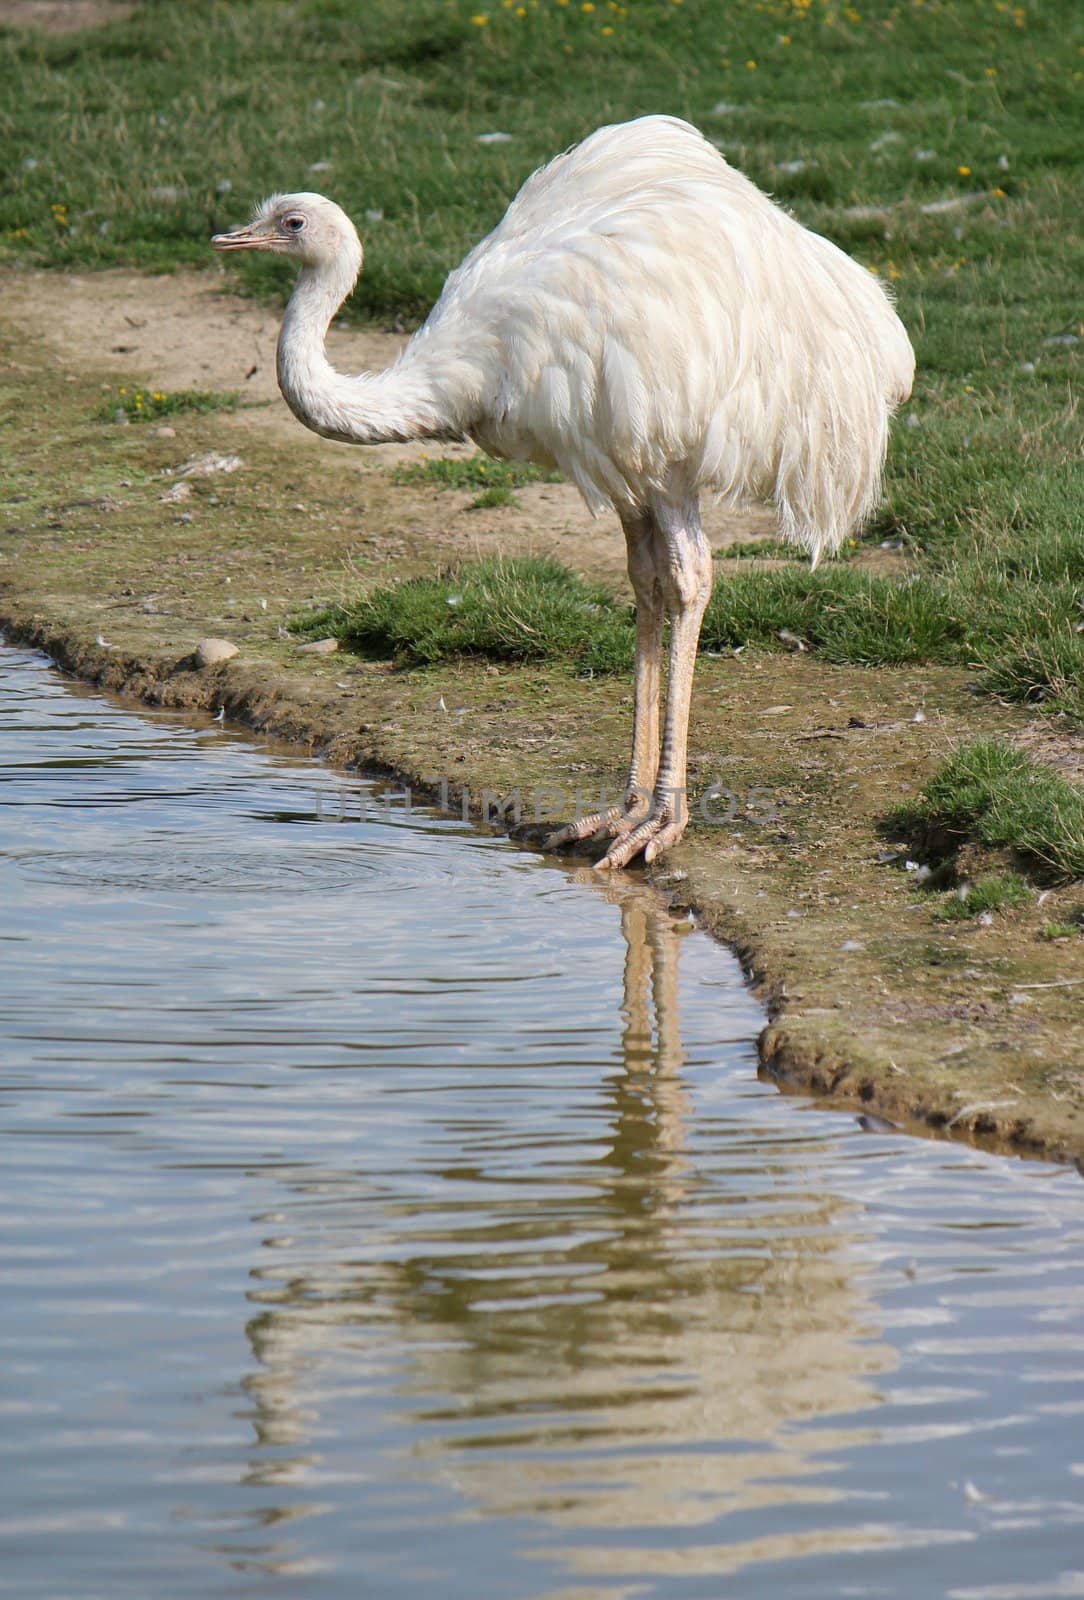 White emu standing next to a pond and ready to drink, its reflect in the water